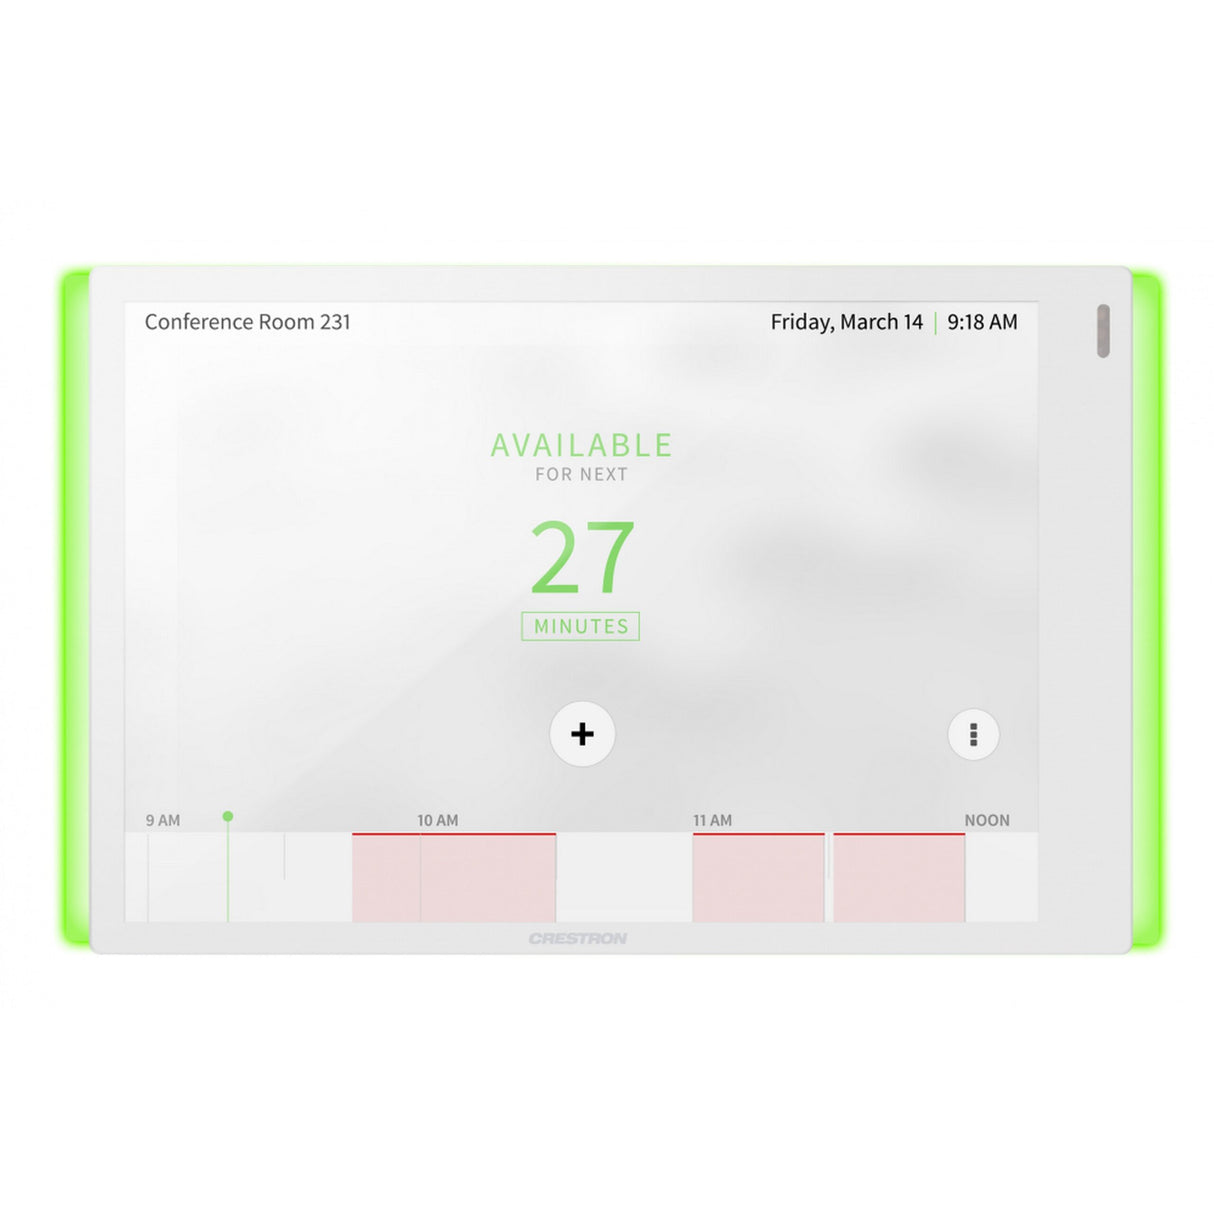 Crestron TSS-770-W-S-LB KIT 7-Inch Room Scheduling Touch Display, White, Light Bar